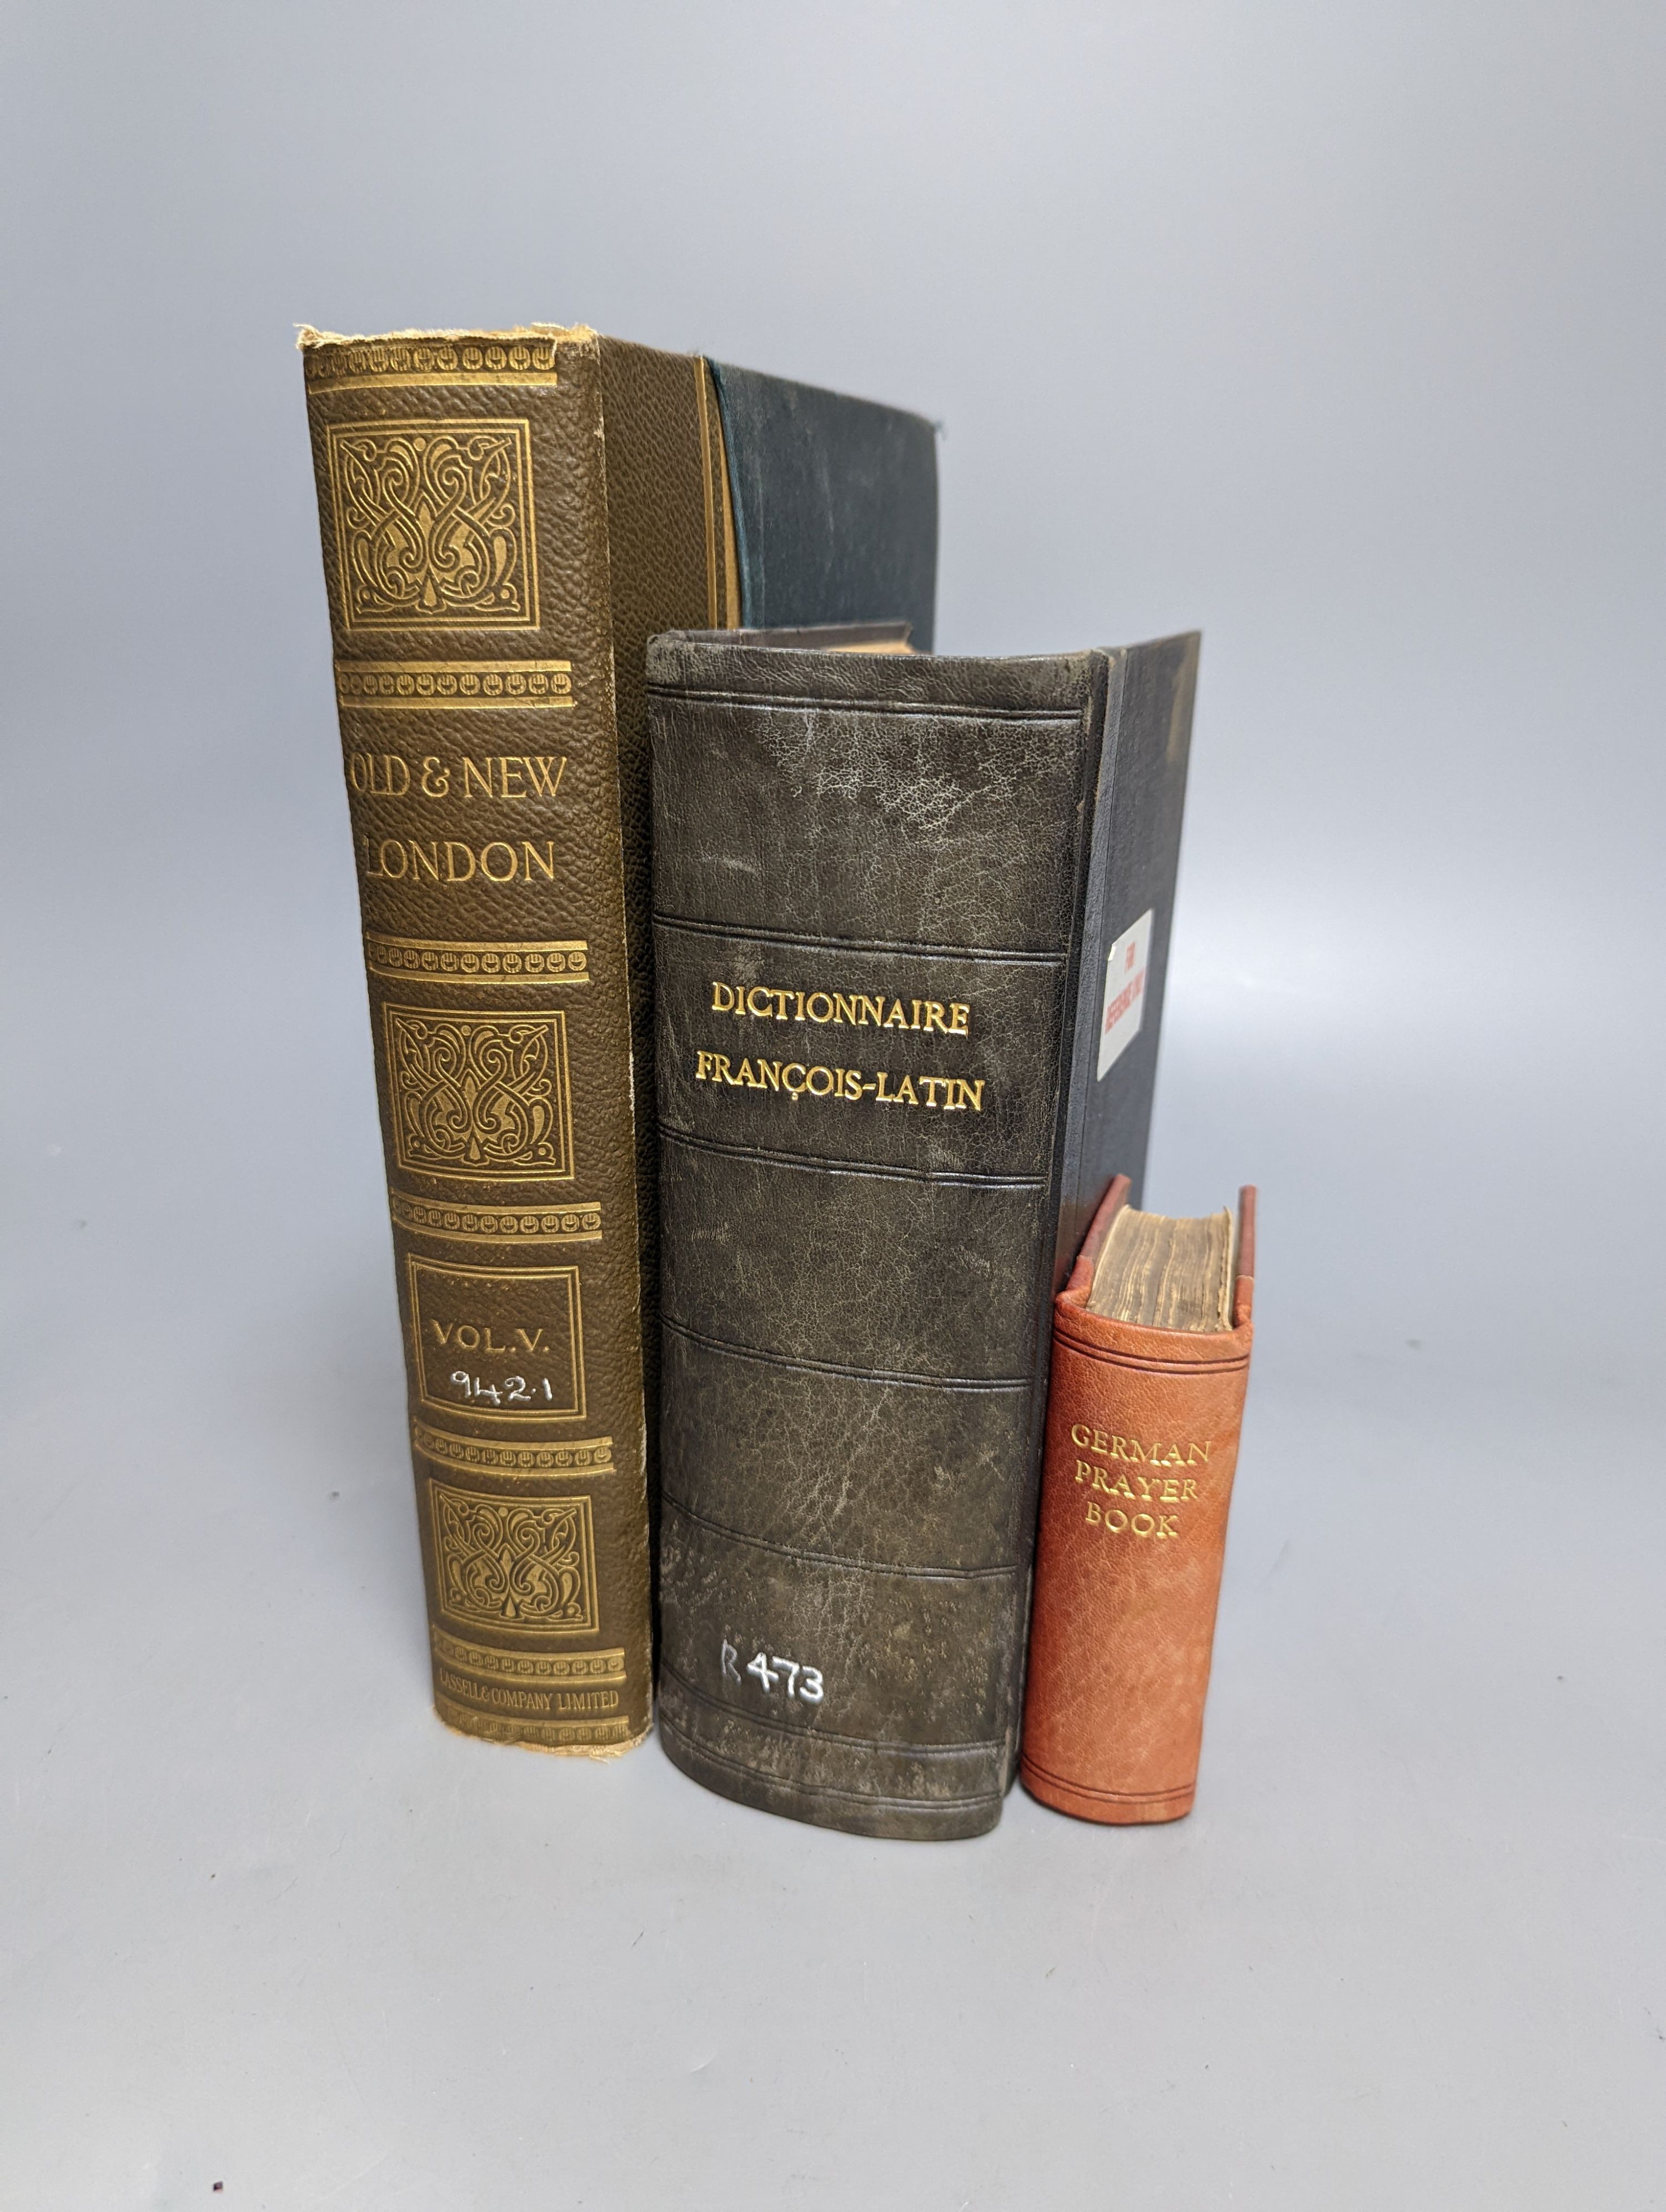 Miscellaneous Books - 19th and 20th centuries, mostly cloth bindings, 2 boxes